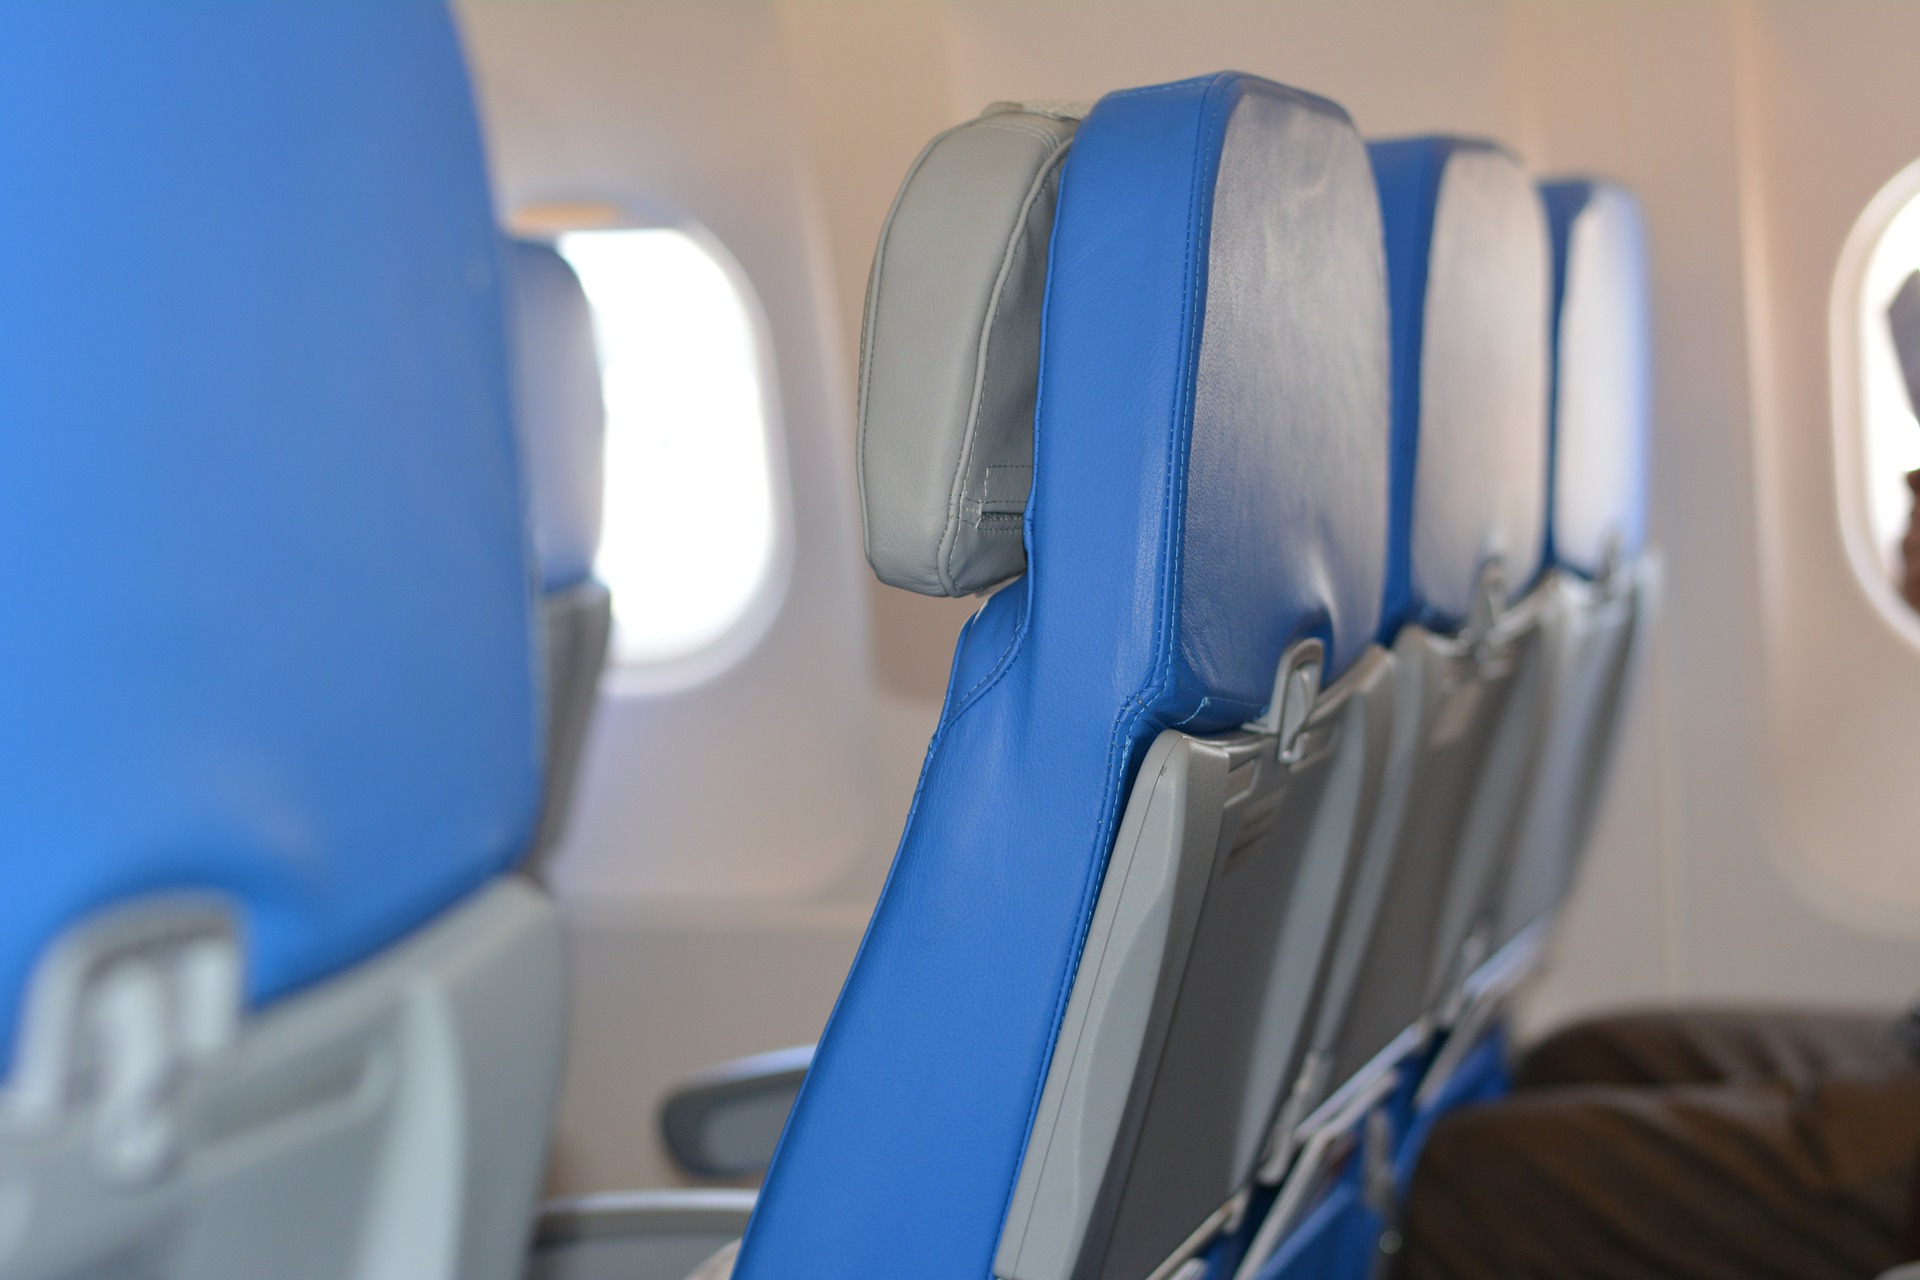 Airplain Economy Seats: What's the difference between different airfare classes?